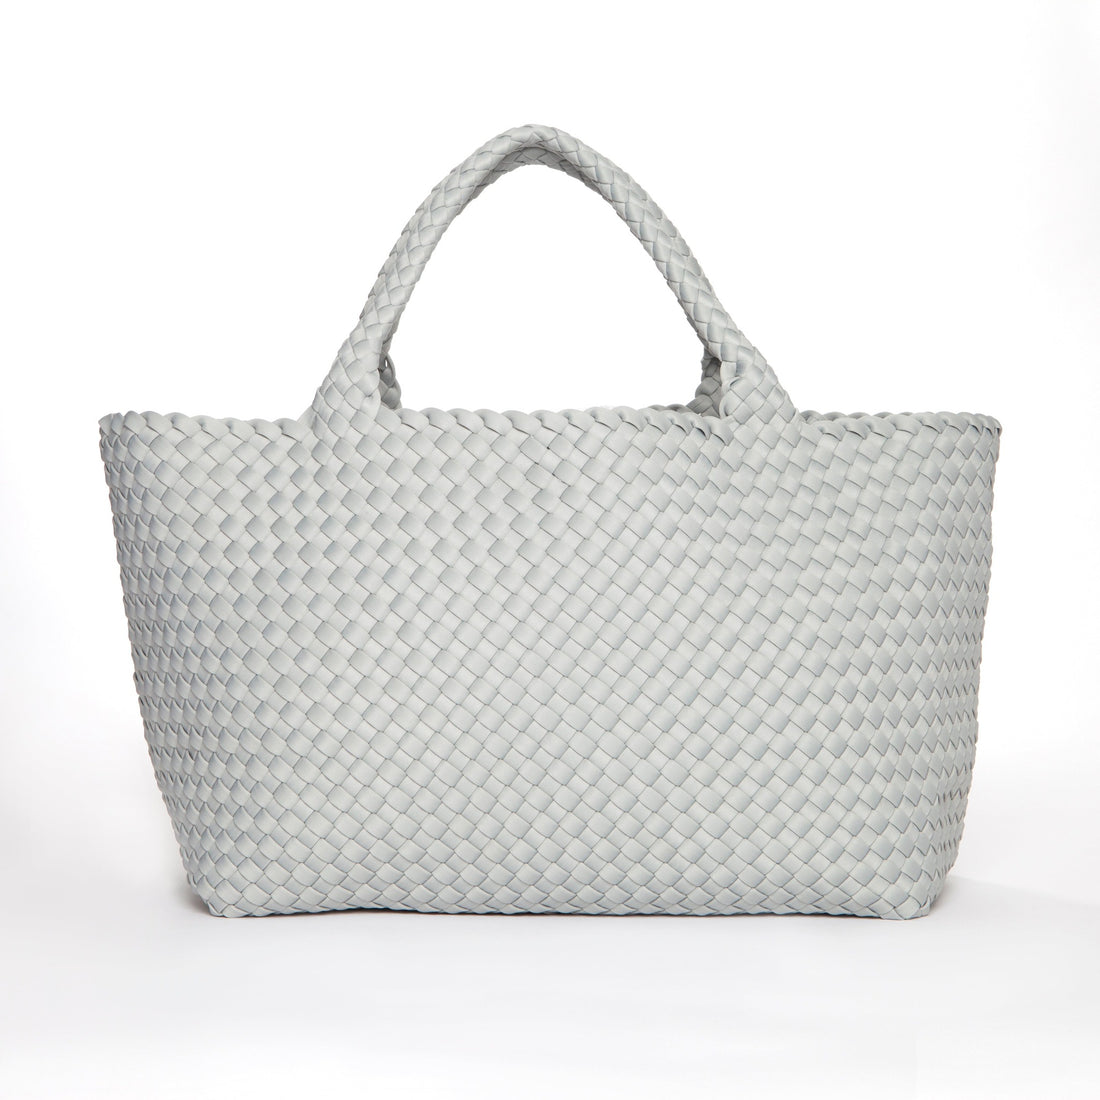 Andreina Bags Silver Grey XL Vida Tote Carryall bag Carry-all bag. Perfect Size Carryall bag great for office, travel, new mums, luggage. Comes with detached clutch for phone purse.